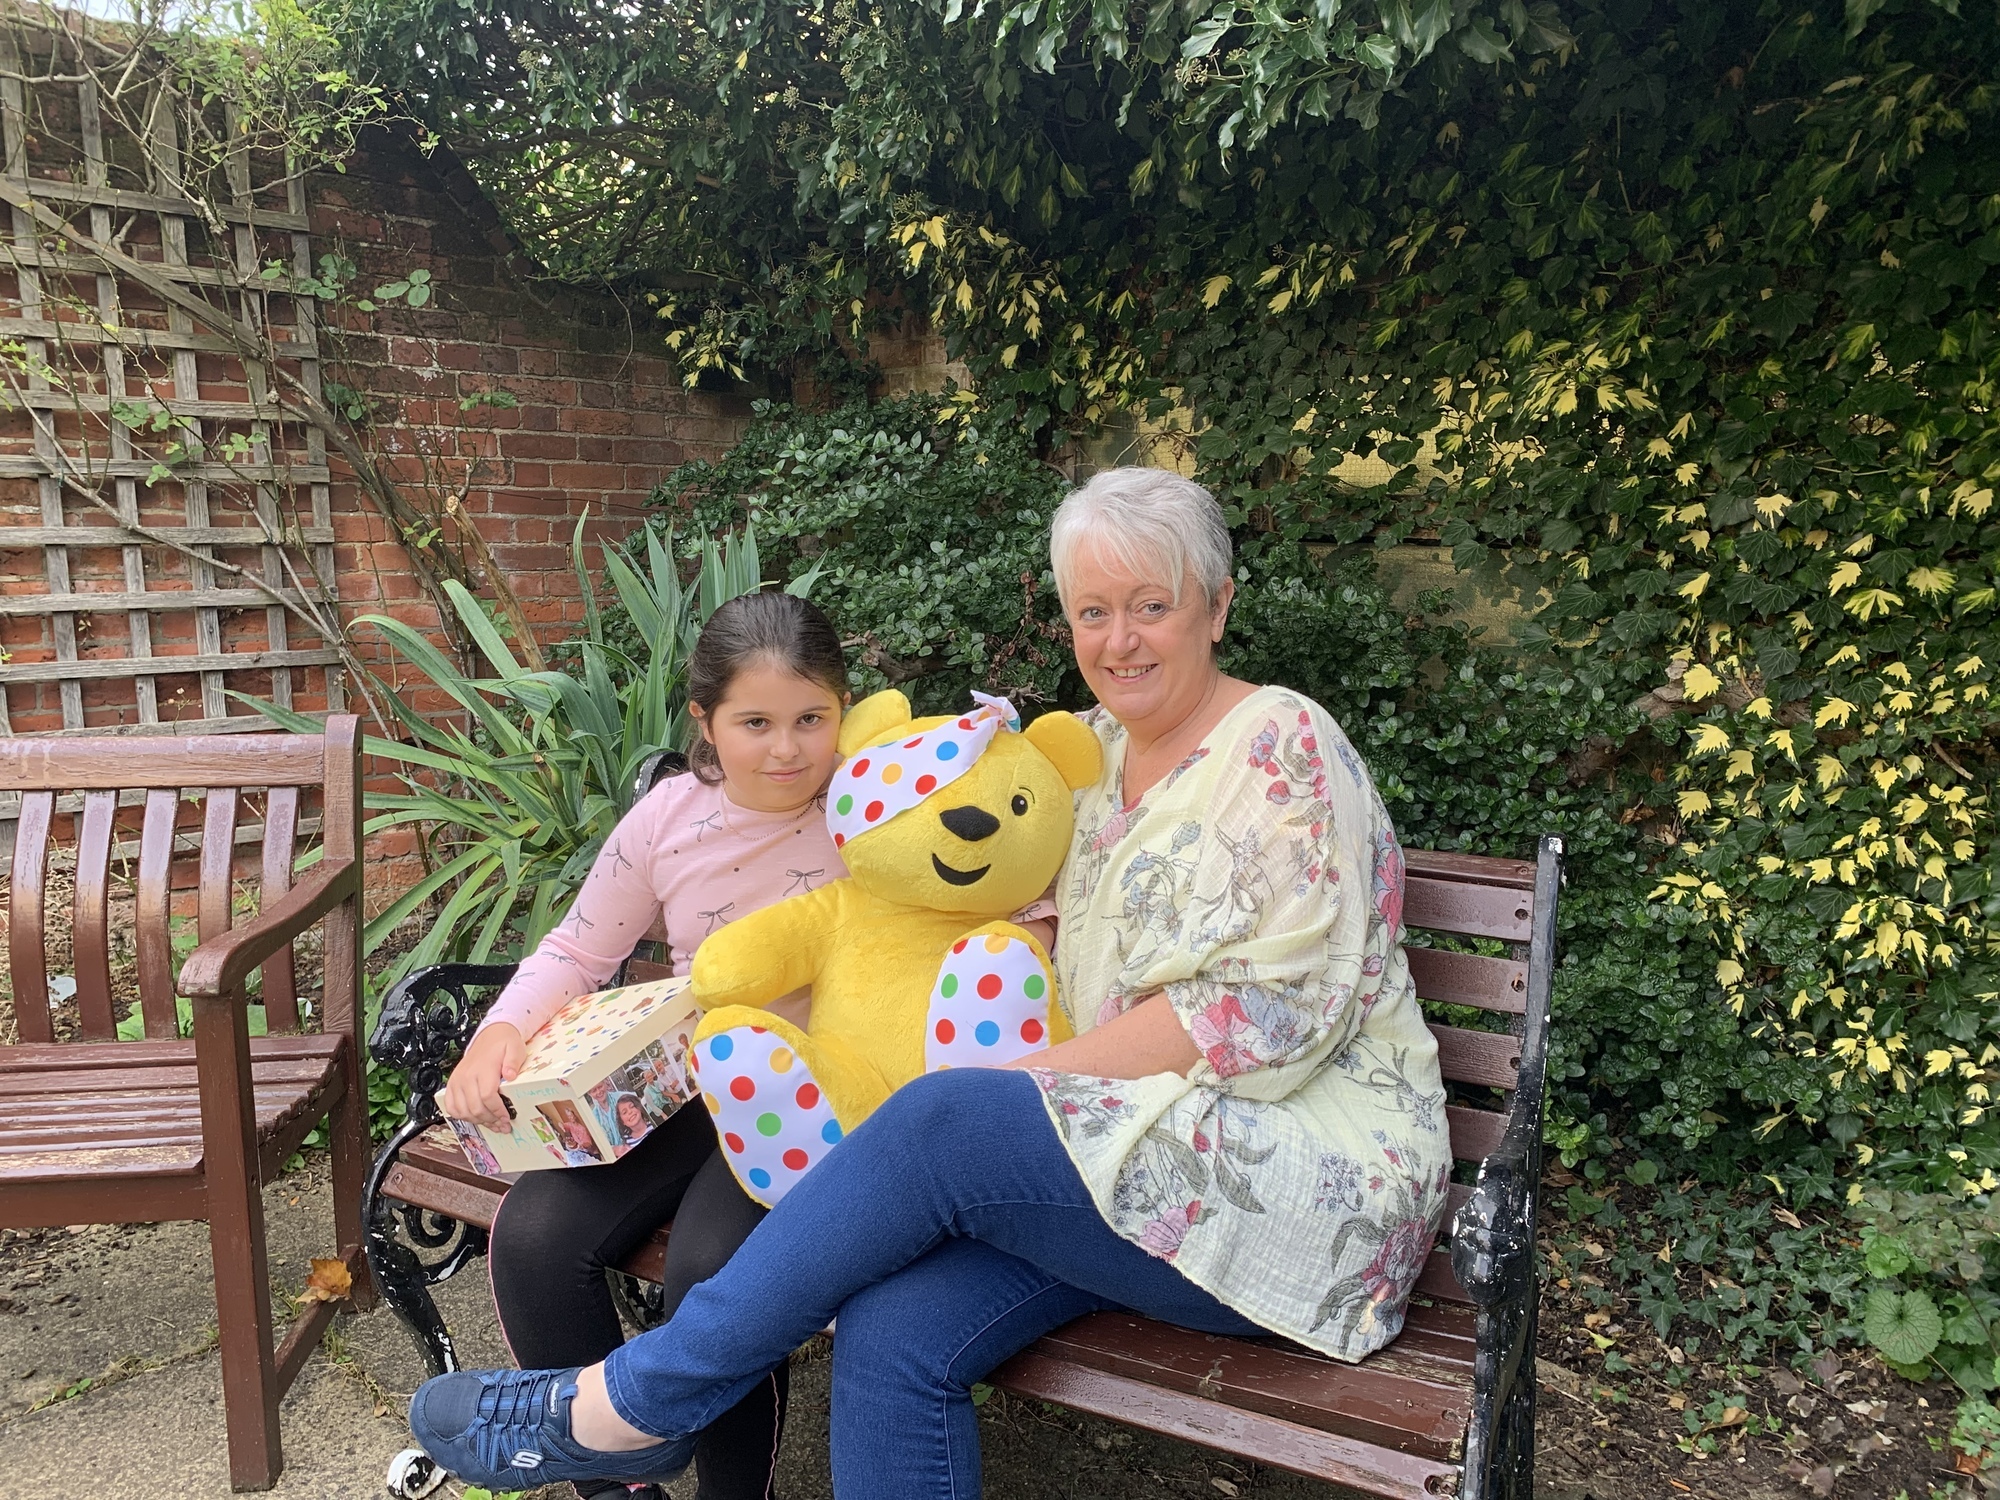 Sophia with her mum and Pudsey